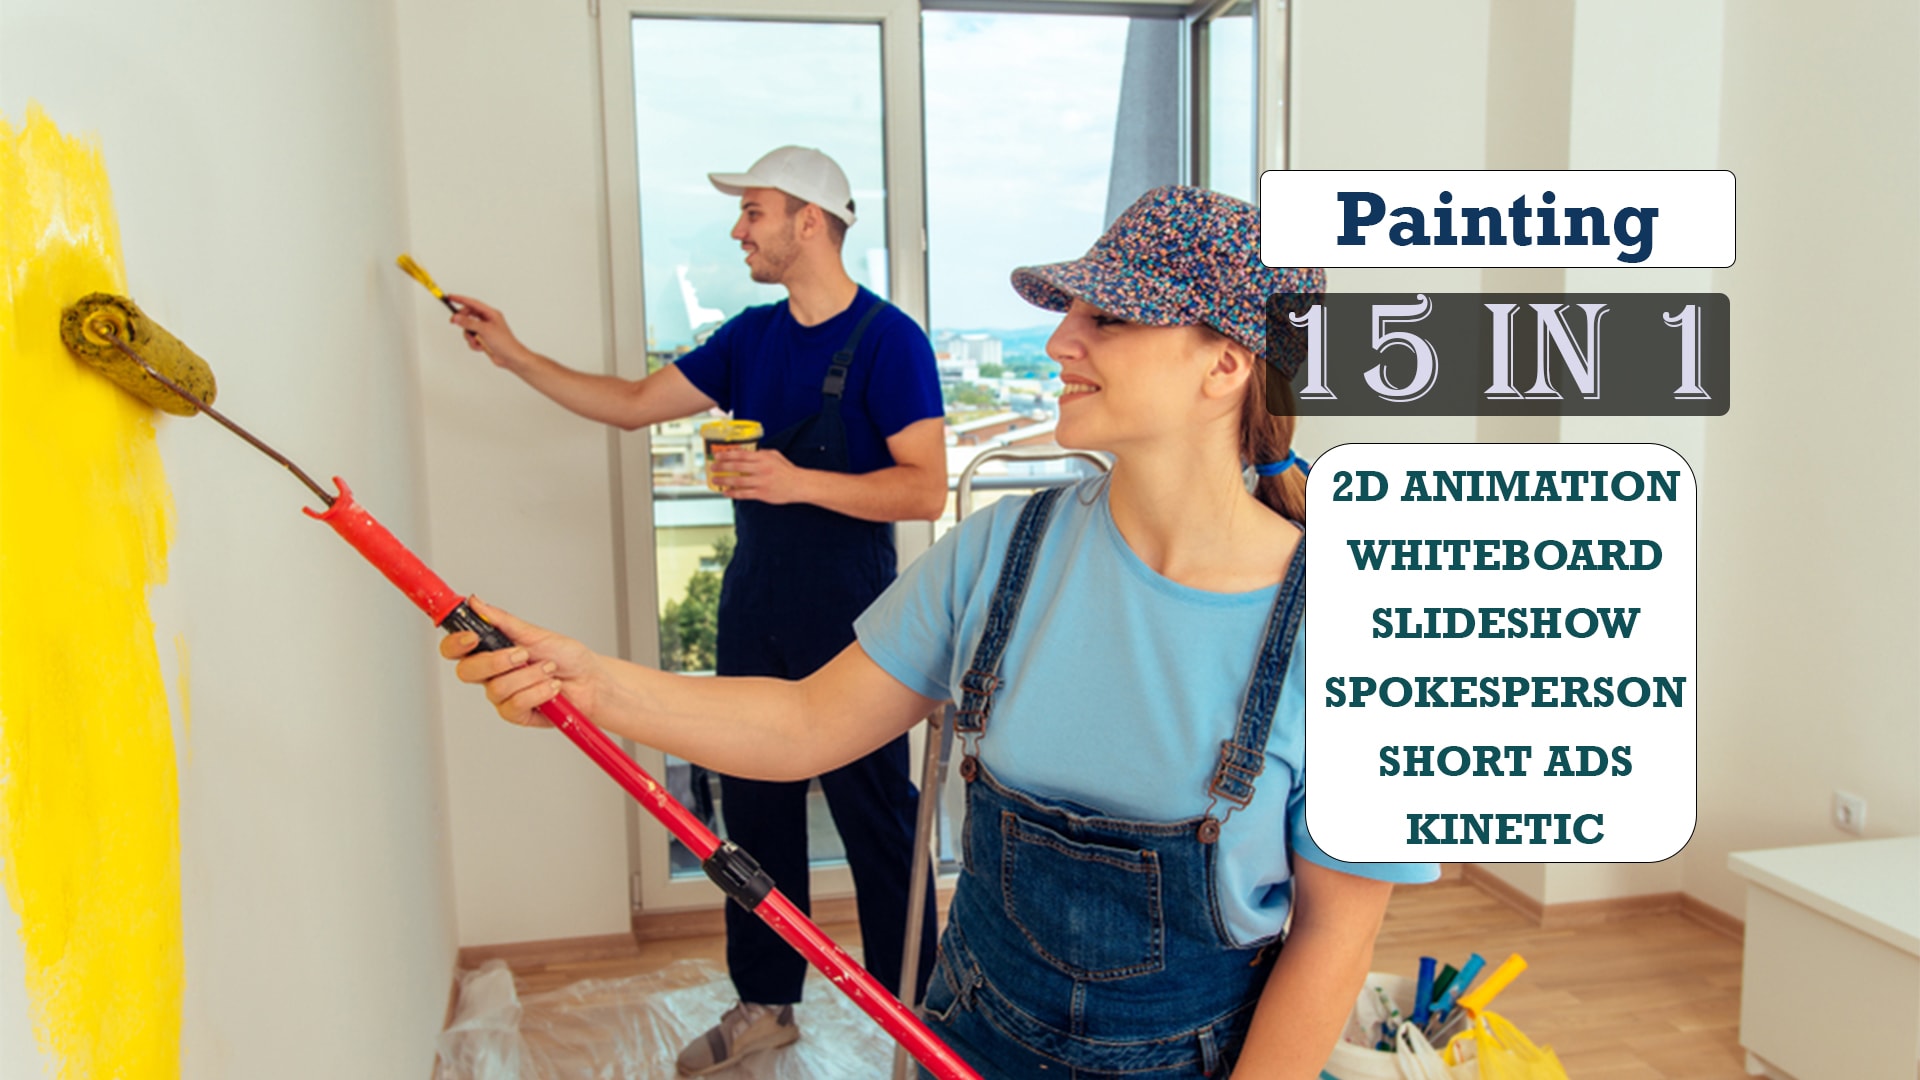 Make painting contractor or painter services promo video ad by Mosfaqur3 Fiverr image